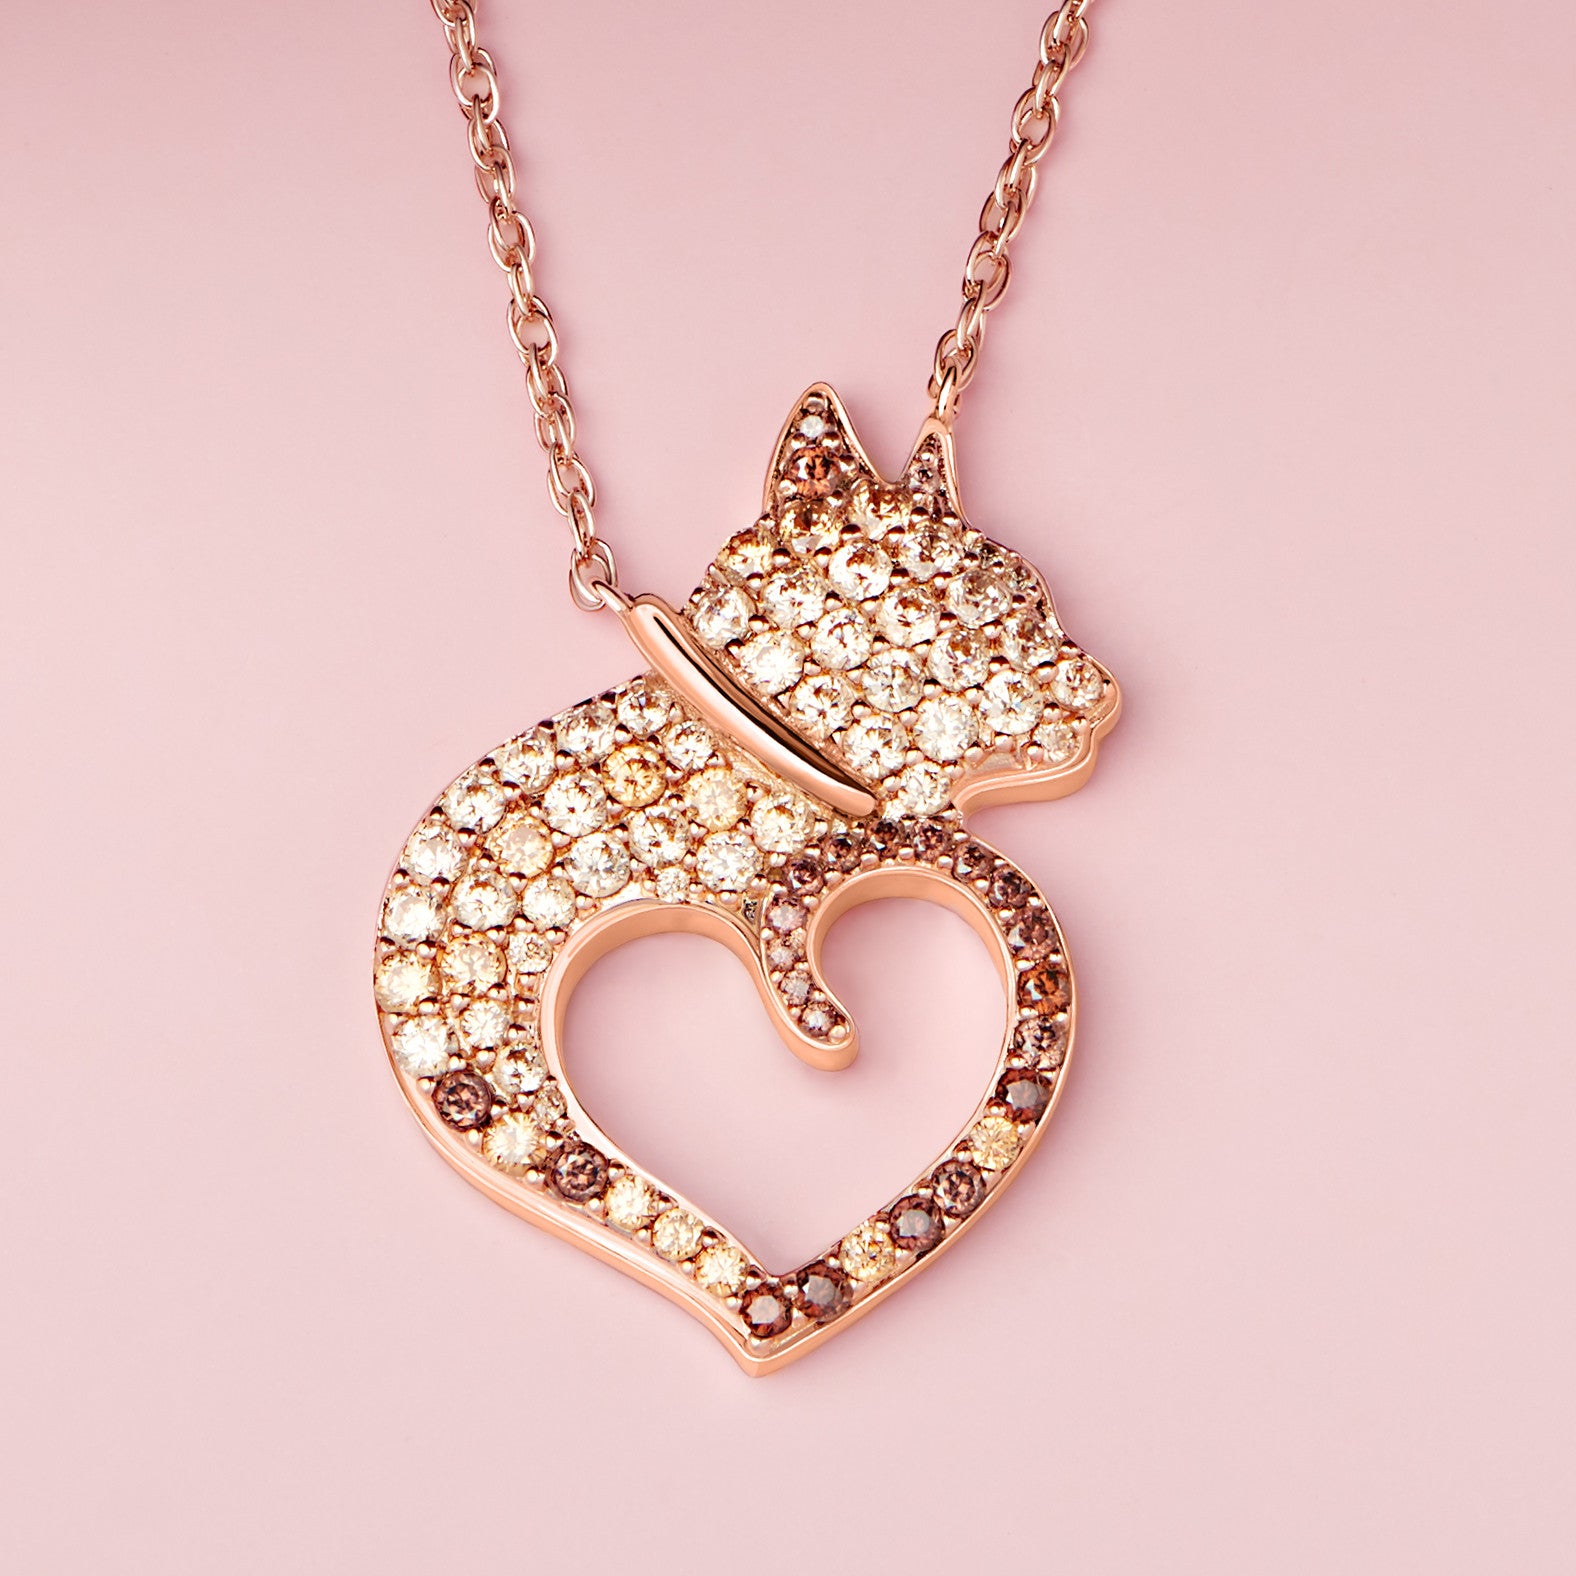 Kitty Love Heart Sterling Silver Pendant Necklace